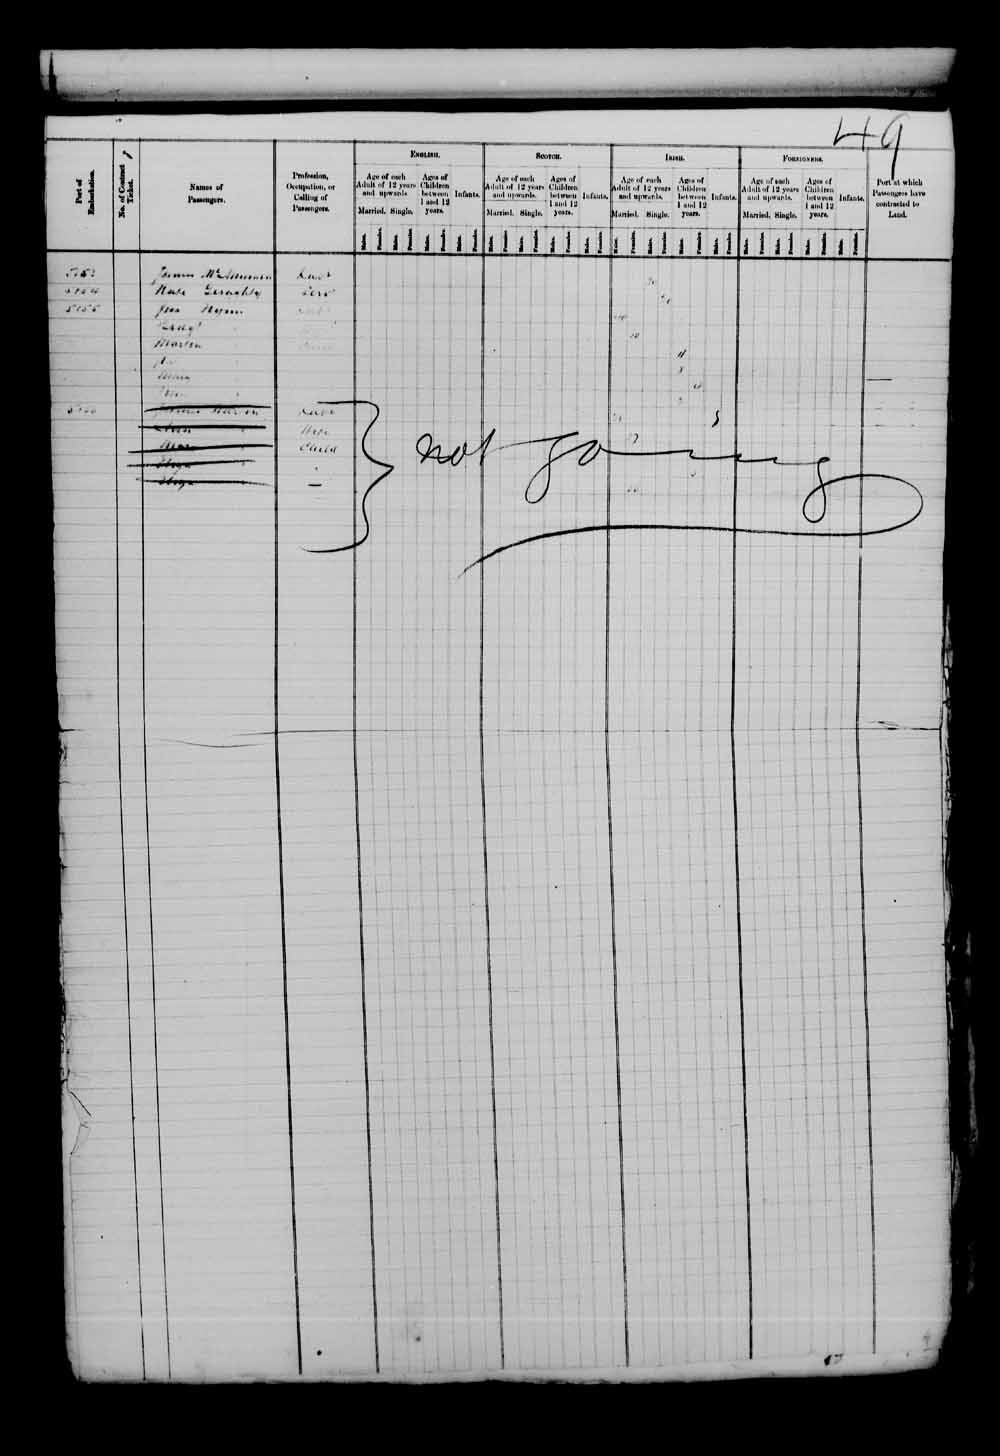 Digitized page of Passenger Lists for Image No.: e003543408